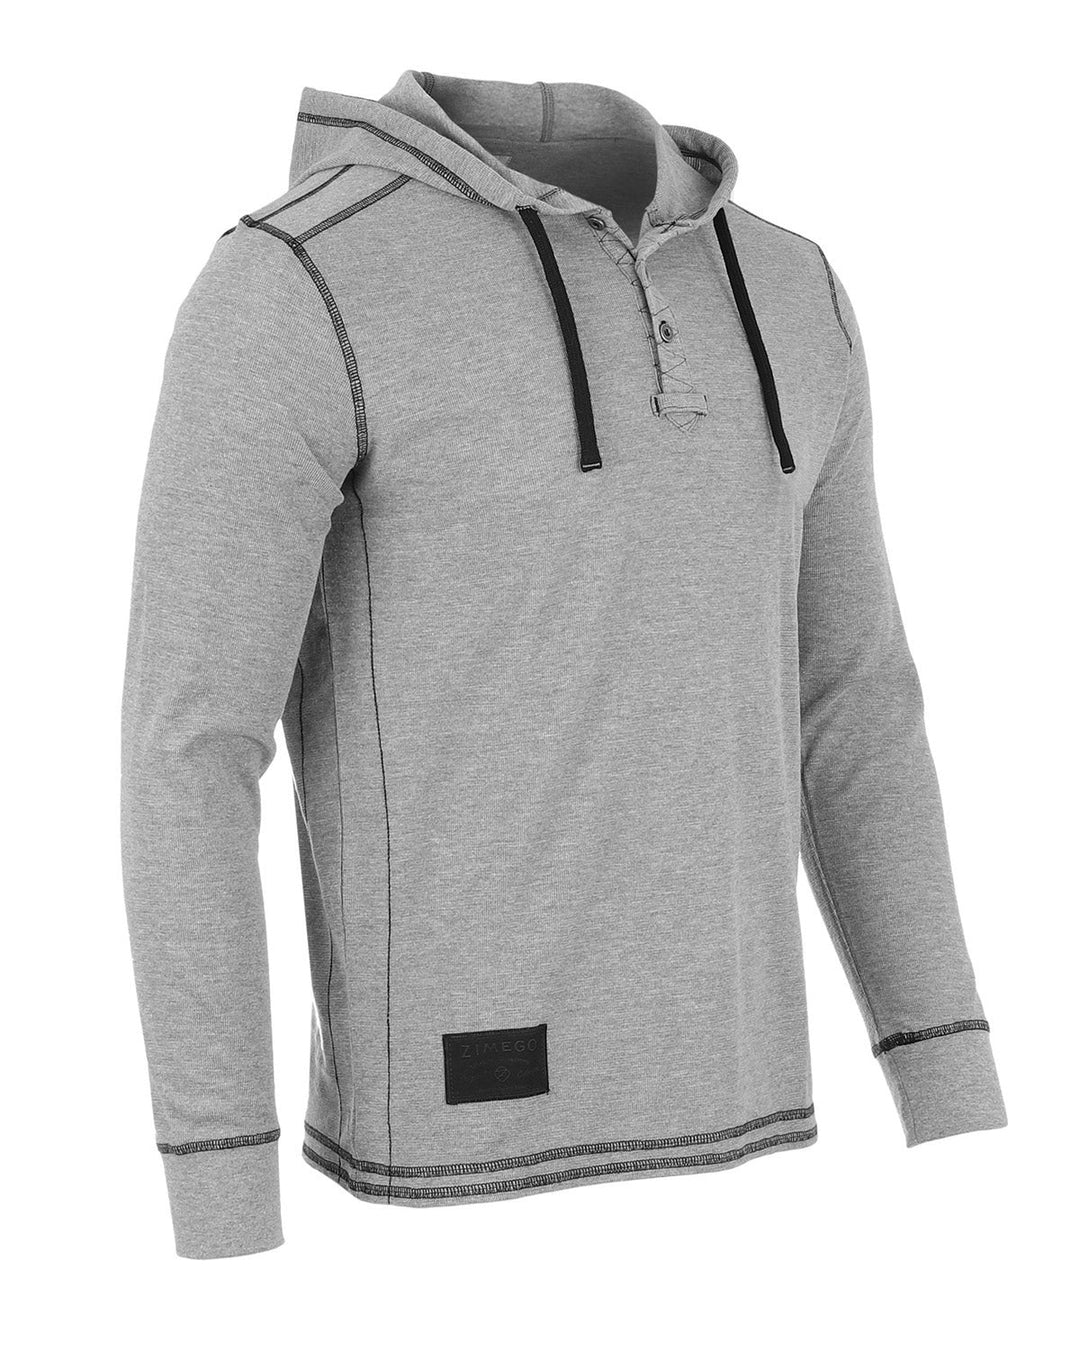 Heather Grey Men's Thermal Long Sleeve Lightweight Fashion Hooded Henley